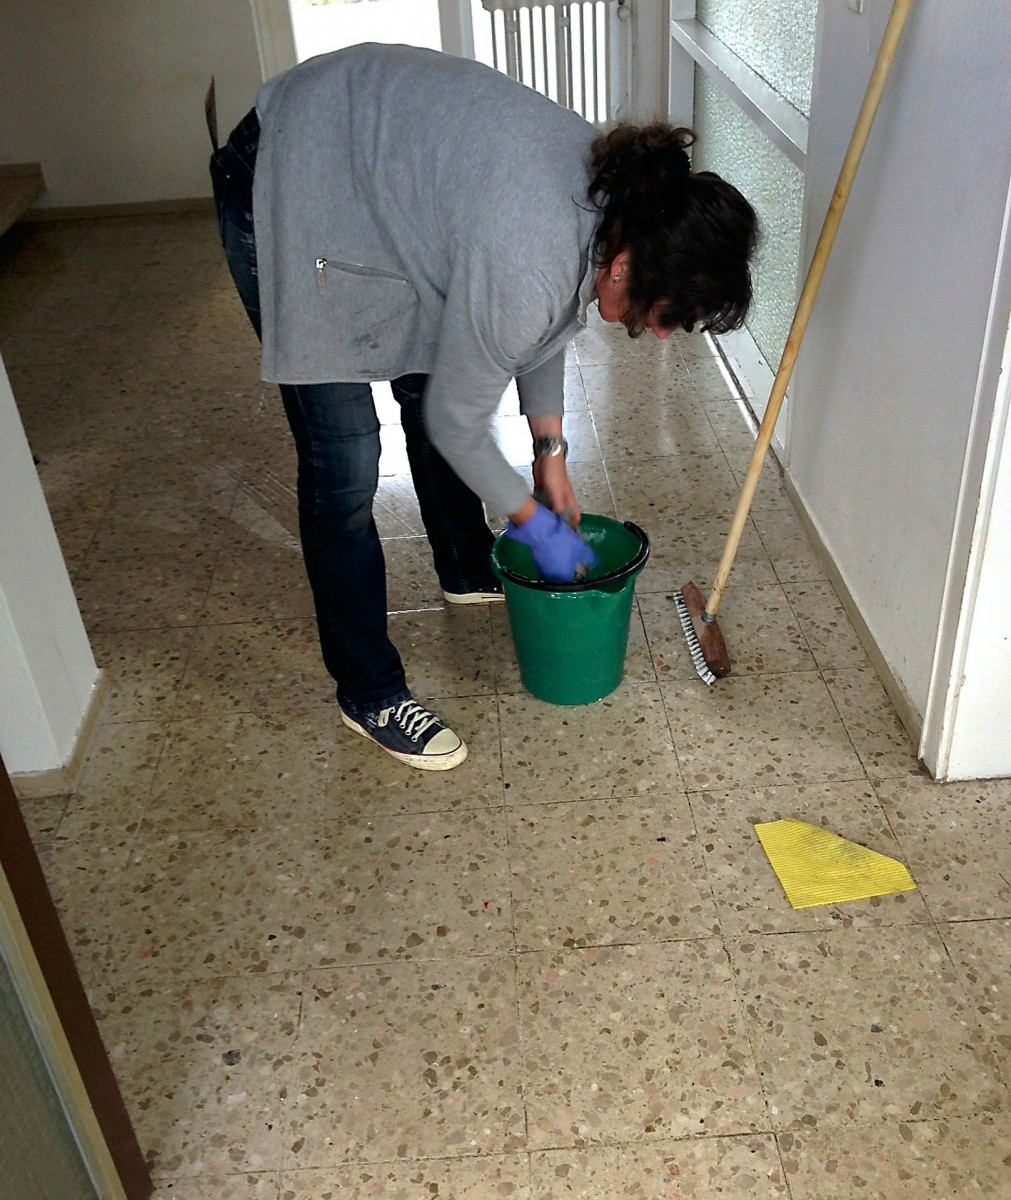 cleaning-lady-258520_1920